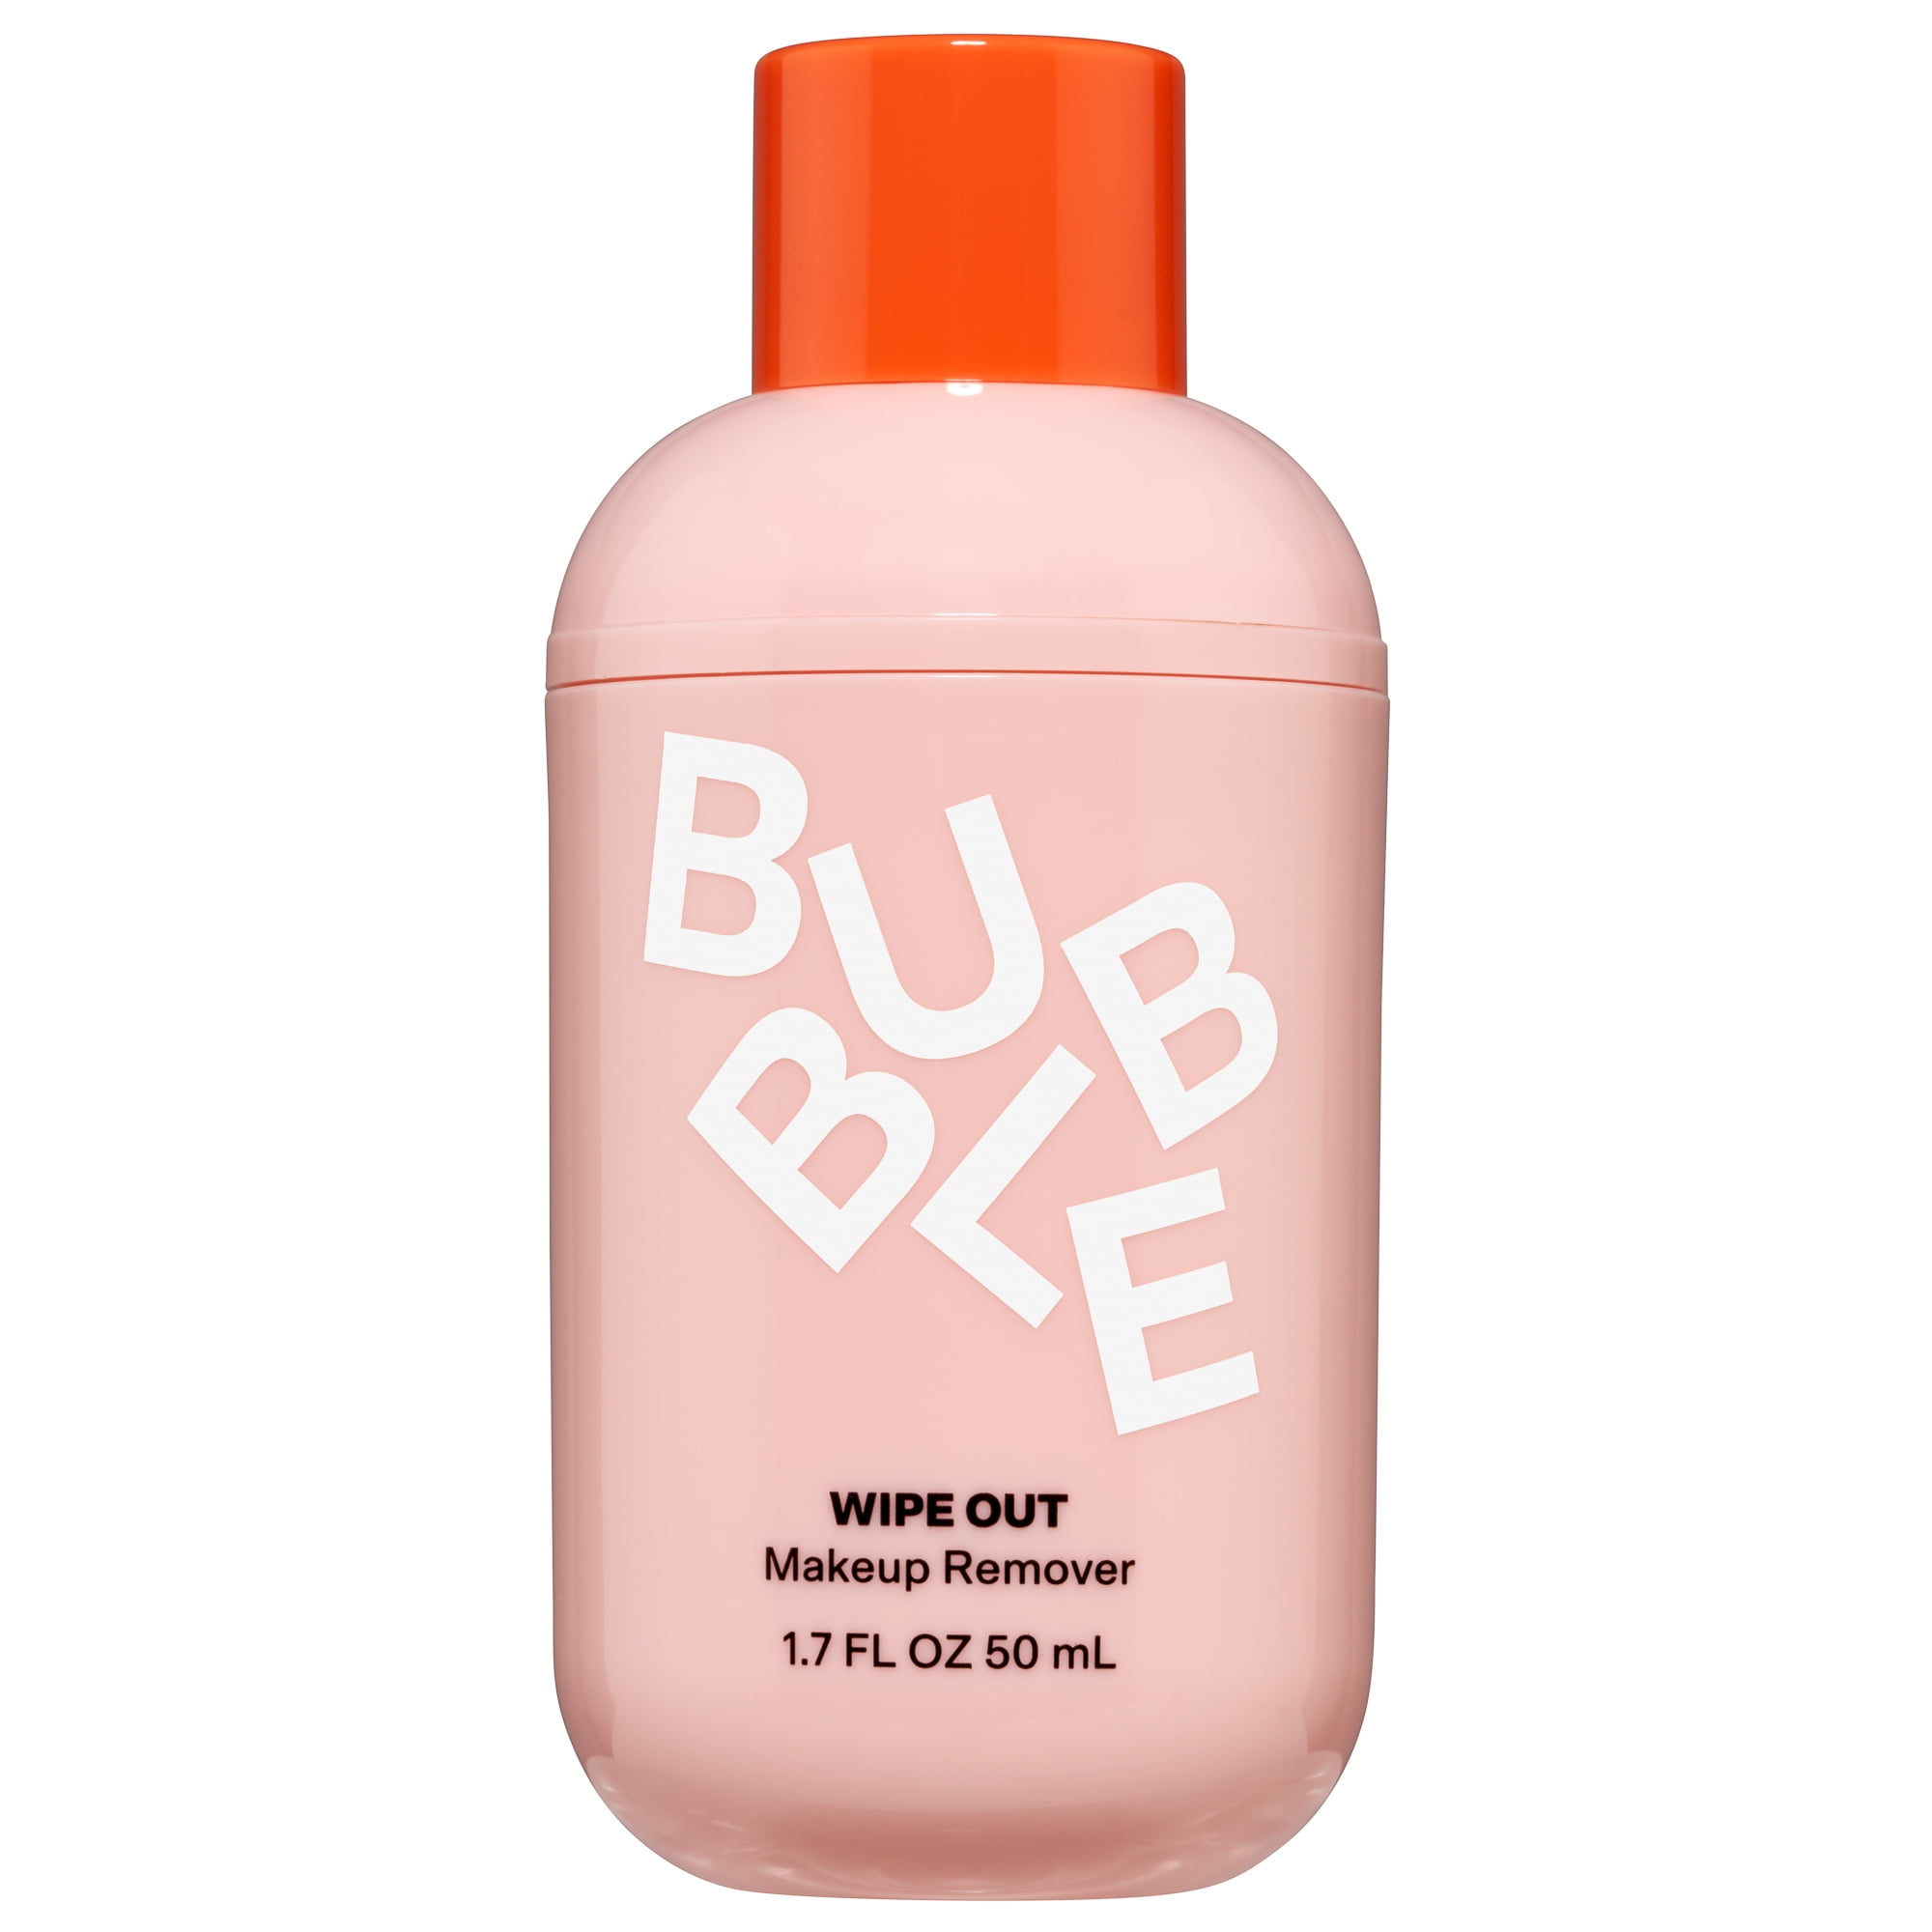 Bubble Skincare Wipe Out Makeup Remover, For All Skin Types, 1.7 fl oz